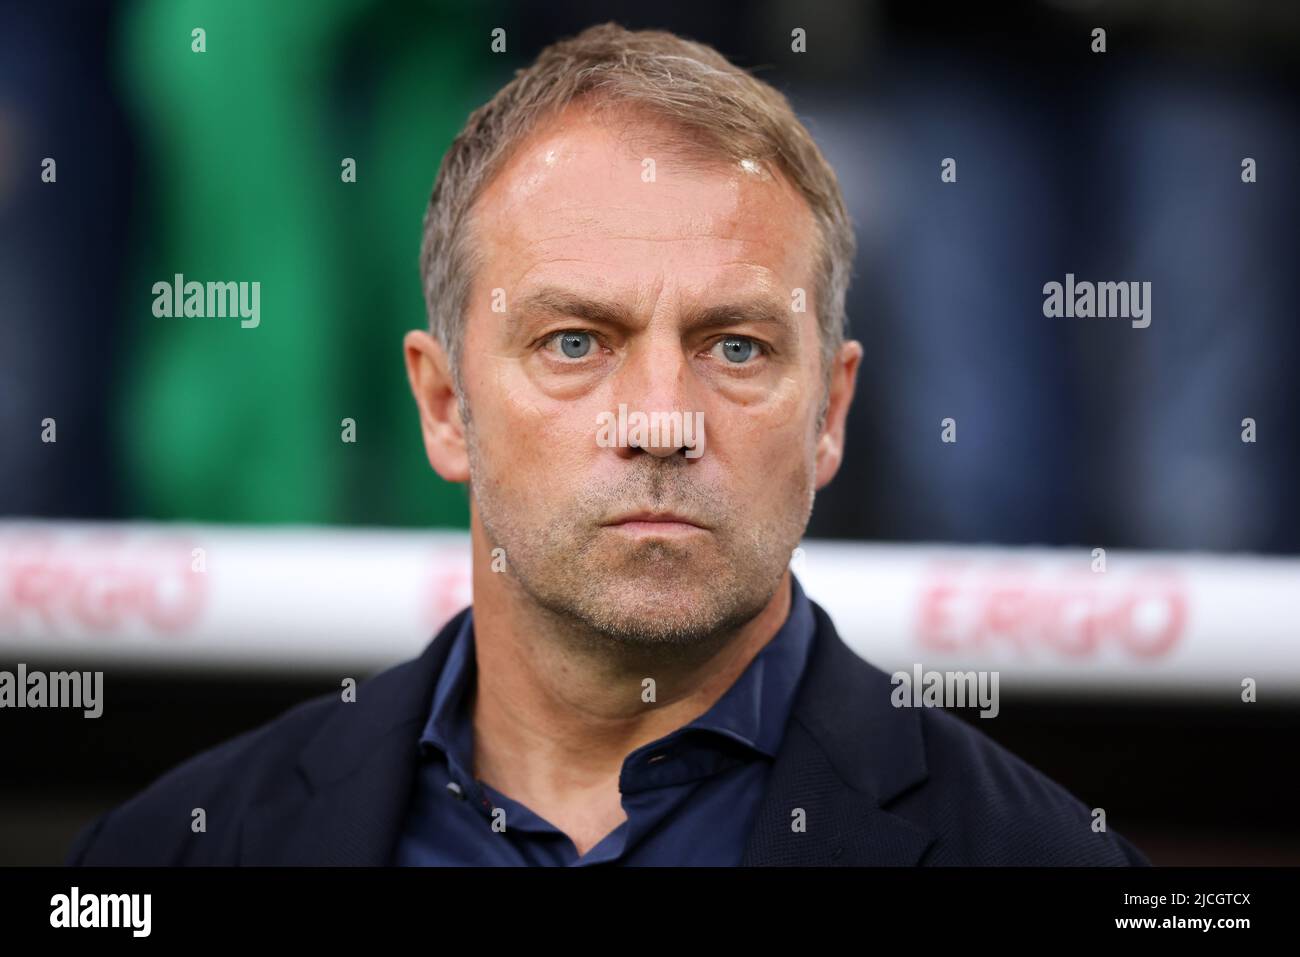 Head coach Hansi Flick  of germany  MUNICH, GERMANY - JUNE 07:  UEFA Nations League League A Group 3 match between Germany and England at Allianz Arena on June 07, 2022 in Munich, Germany. Nations League Deutschland England  © diebilderwelt / Alamy Stock Stock Photo